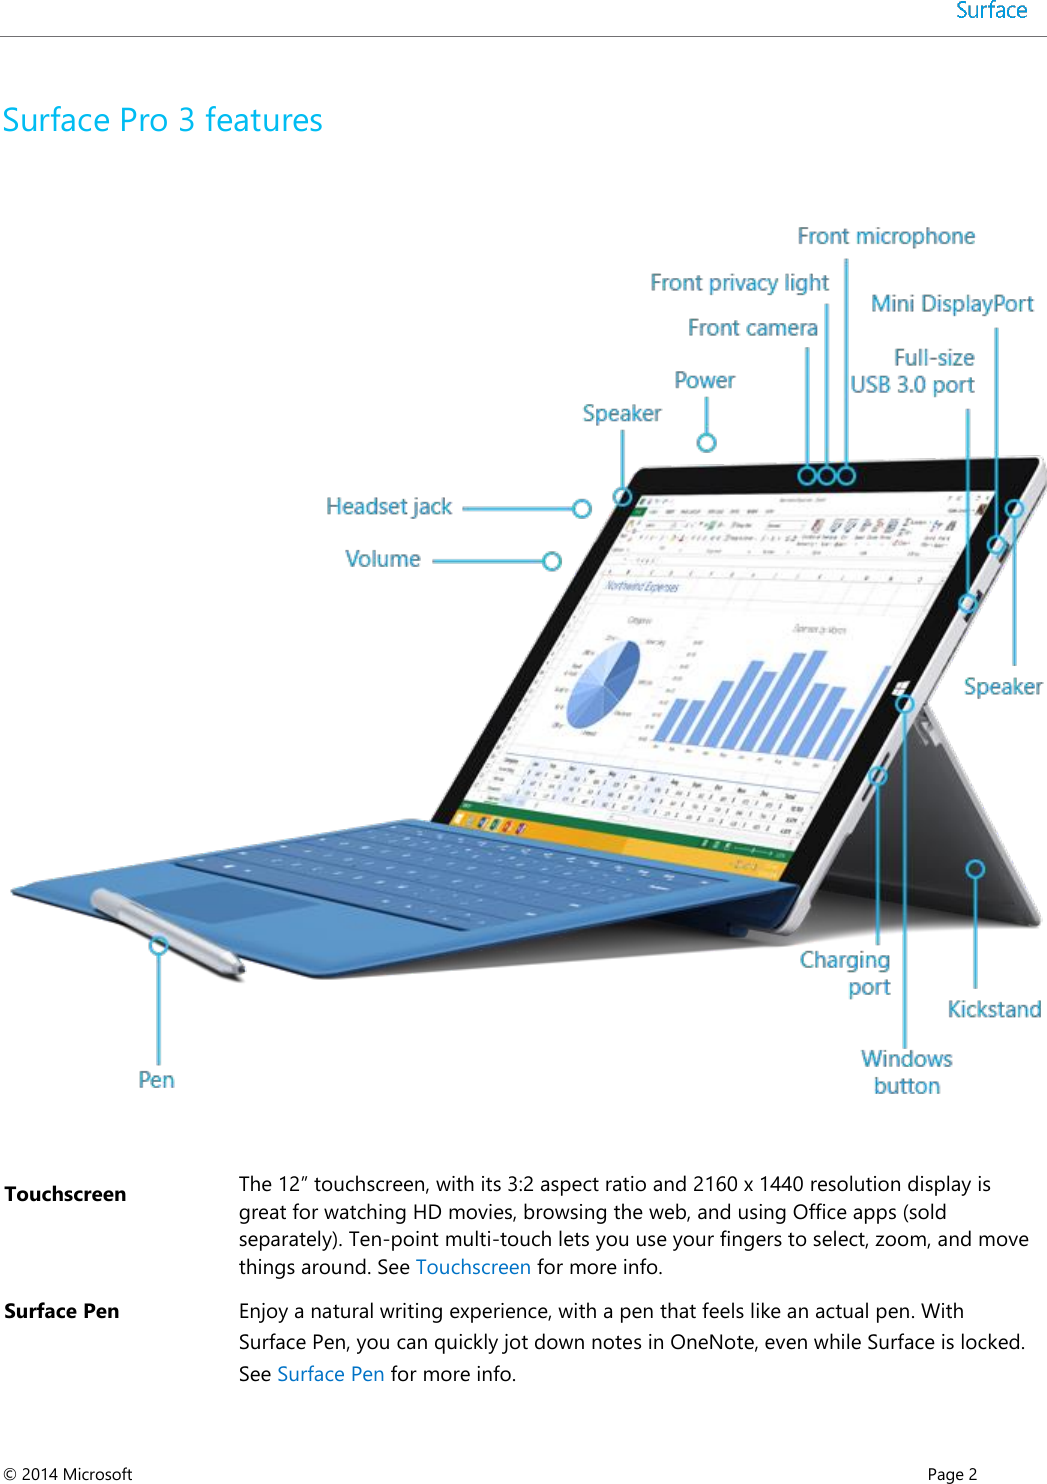  © 2014 Microsoft      Page 2  Surface Pro 3 features  Touchscreen  The 12” touchscreen, with its 3:2 aspect ratio and 2160 x 1440 resolution display is great for watching HD movies, browsing the web, and using Office apps (sold separately). Ten-point multi-touch lets you use your fingers to select, zoom, and move things around. See Touchscreen for more info. Surface Pen Enjoy a natural writing experience, with a pen that feels like an actual pen. With Surface Pen, you can quickly jot down notes in OneNote, even while Surface is locked. See Surface Pen for more info. 